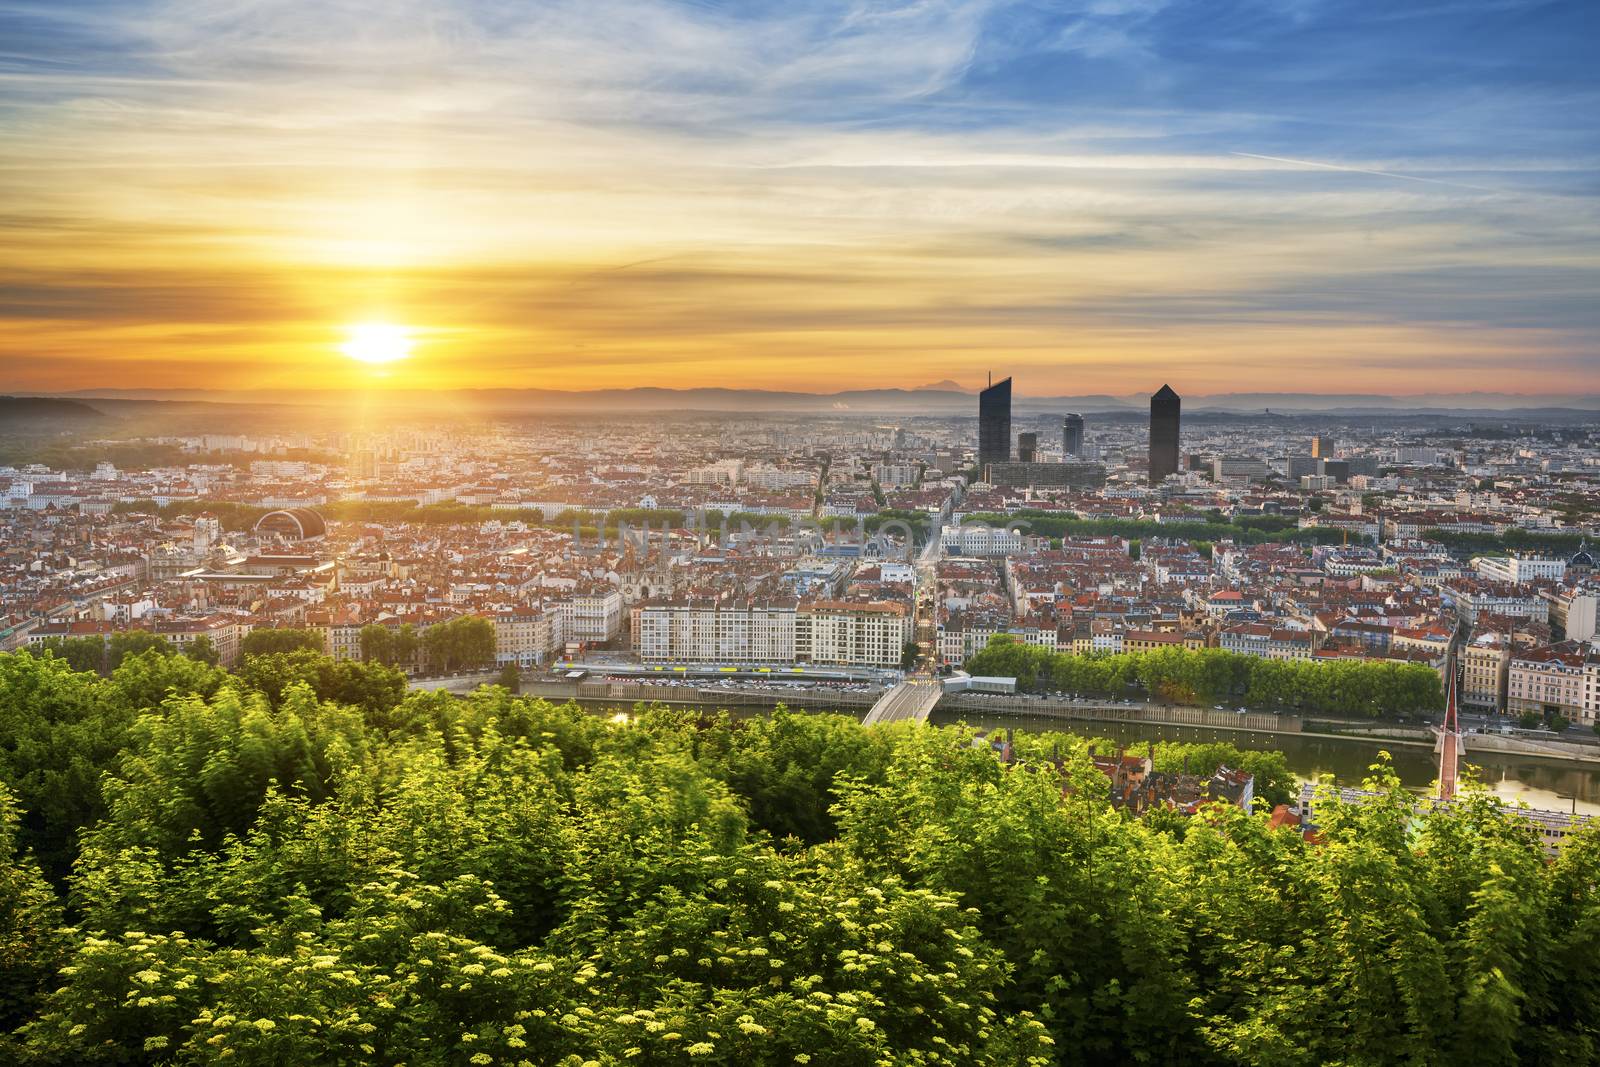 View of Lyon at sunrise, France.